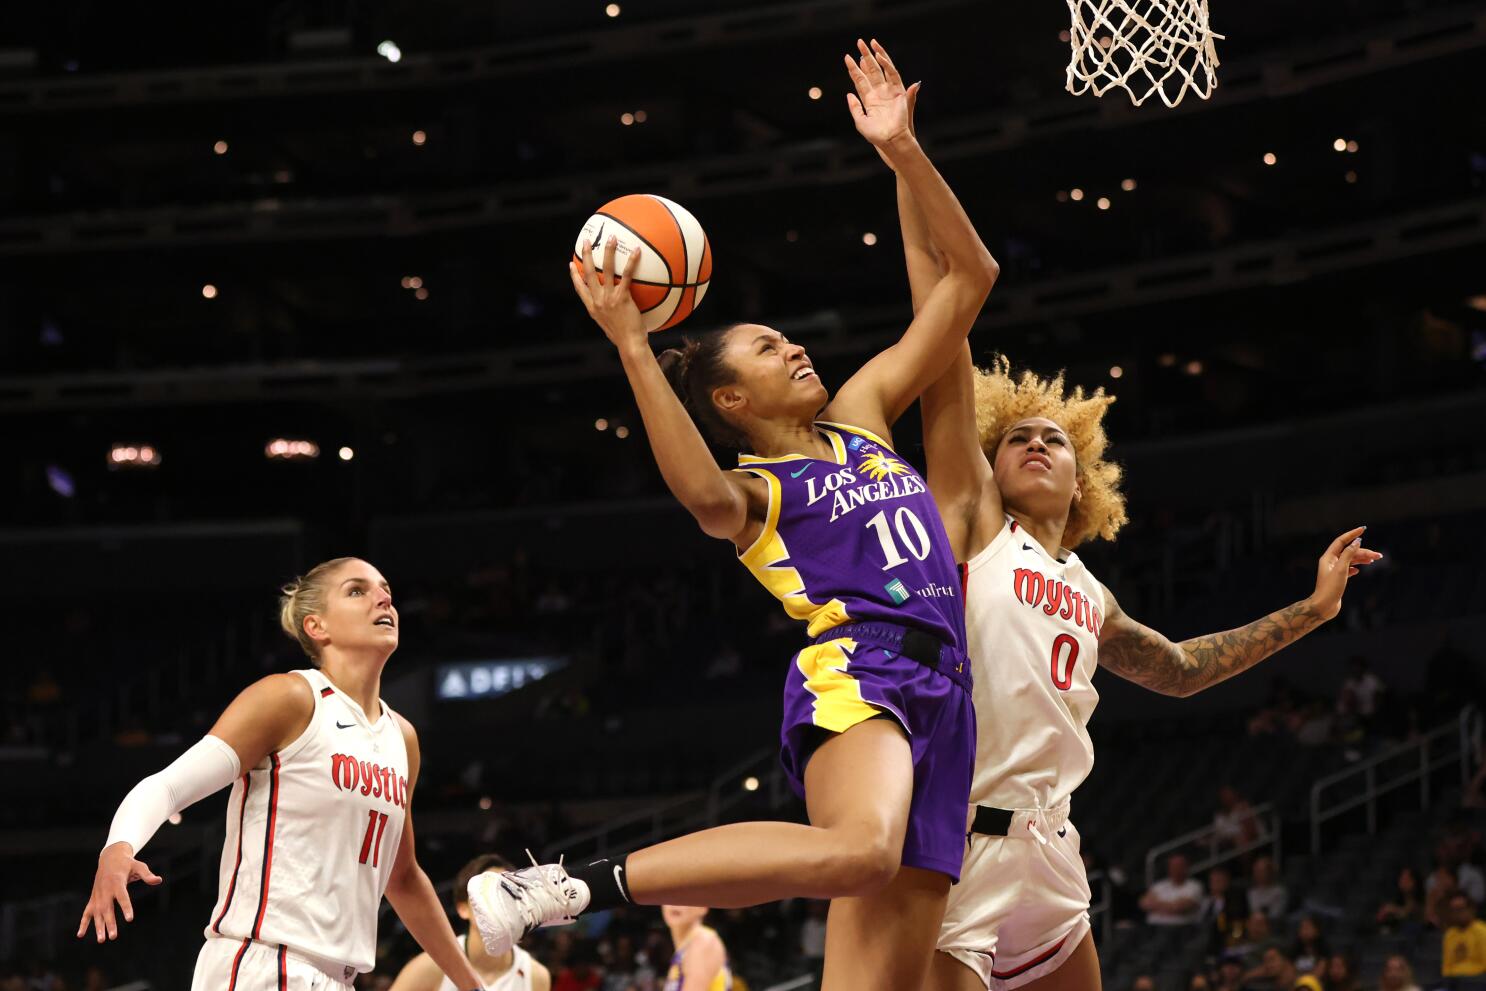 LA Sparks fighting to grab last playoff spot in rebuilding year